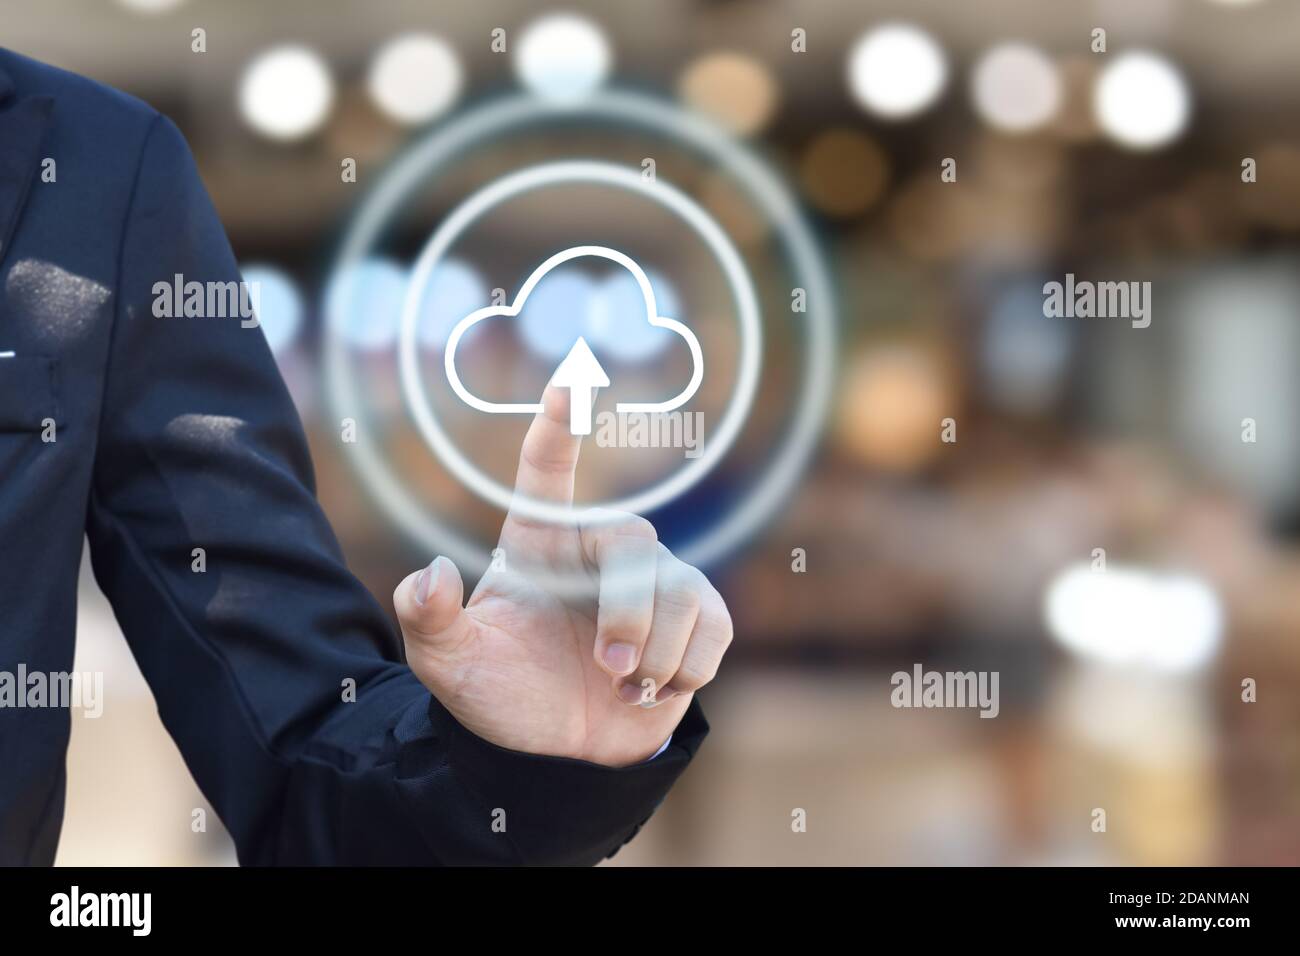 Businessman hand pressing cloud upload icon on virtual touchscreen interface. copy space. Stock Photo